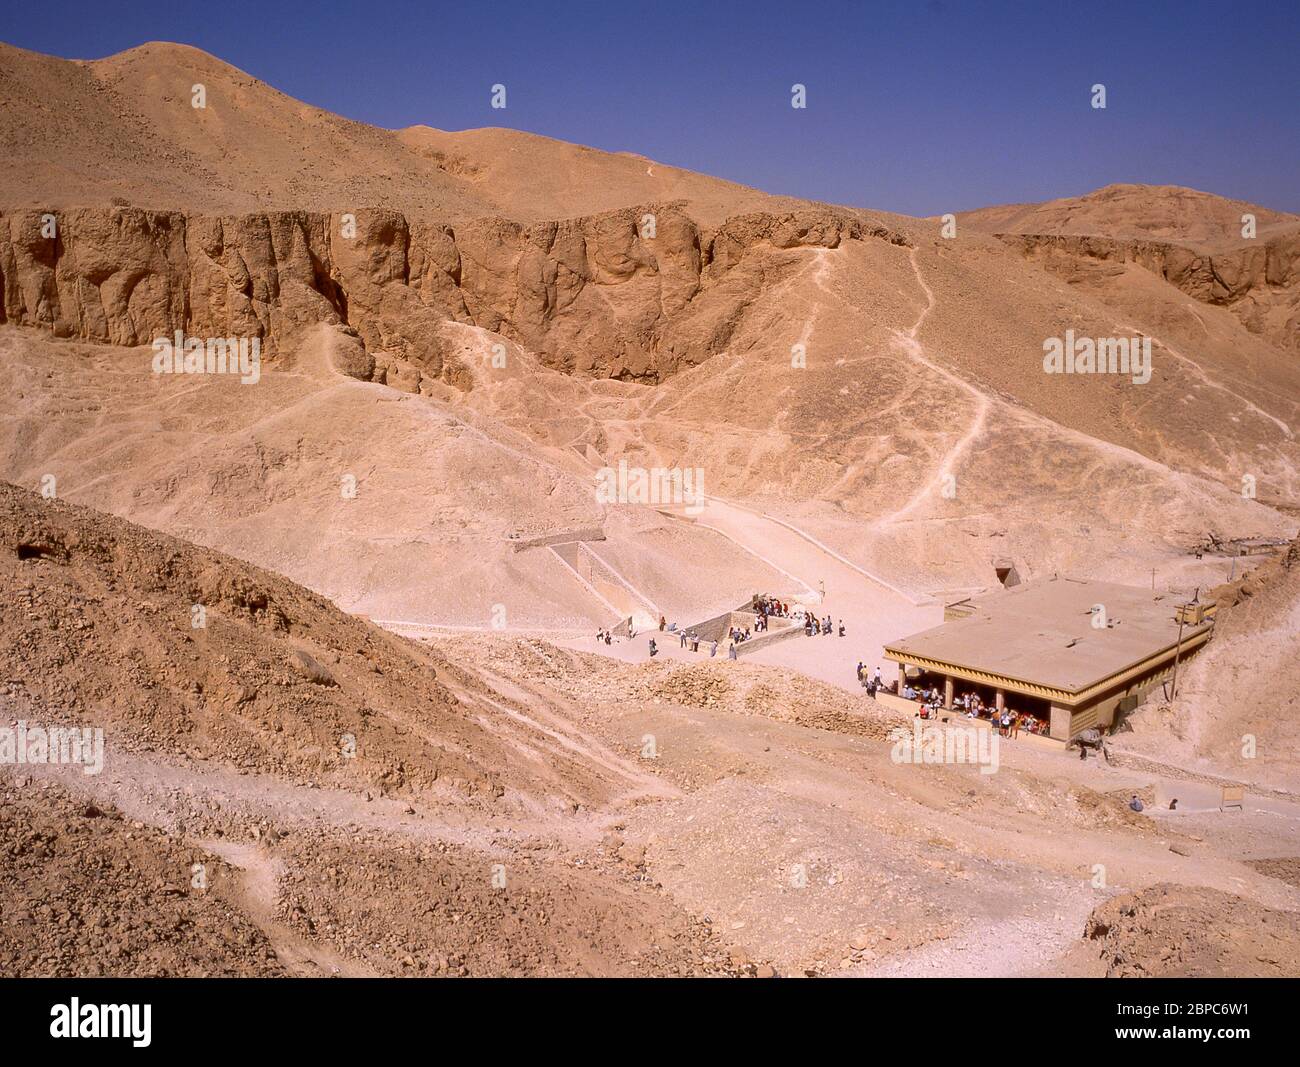 Tombs in The Valley of The Kings, Theban Necropolis, Luxor, Luxor Governorate, Republic of Egypt Stock Photo